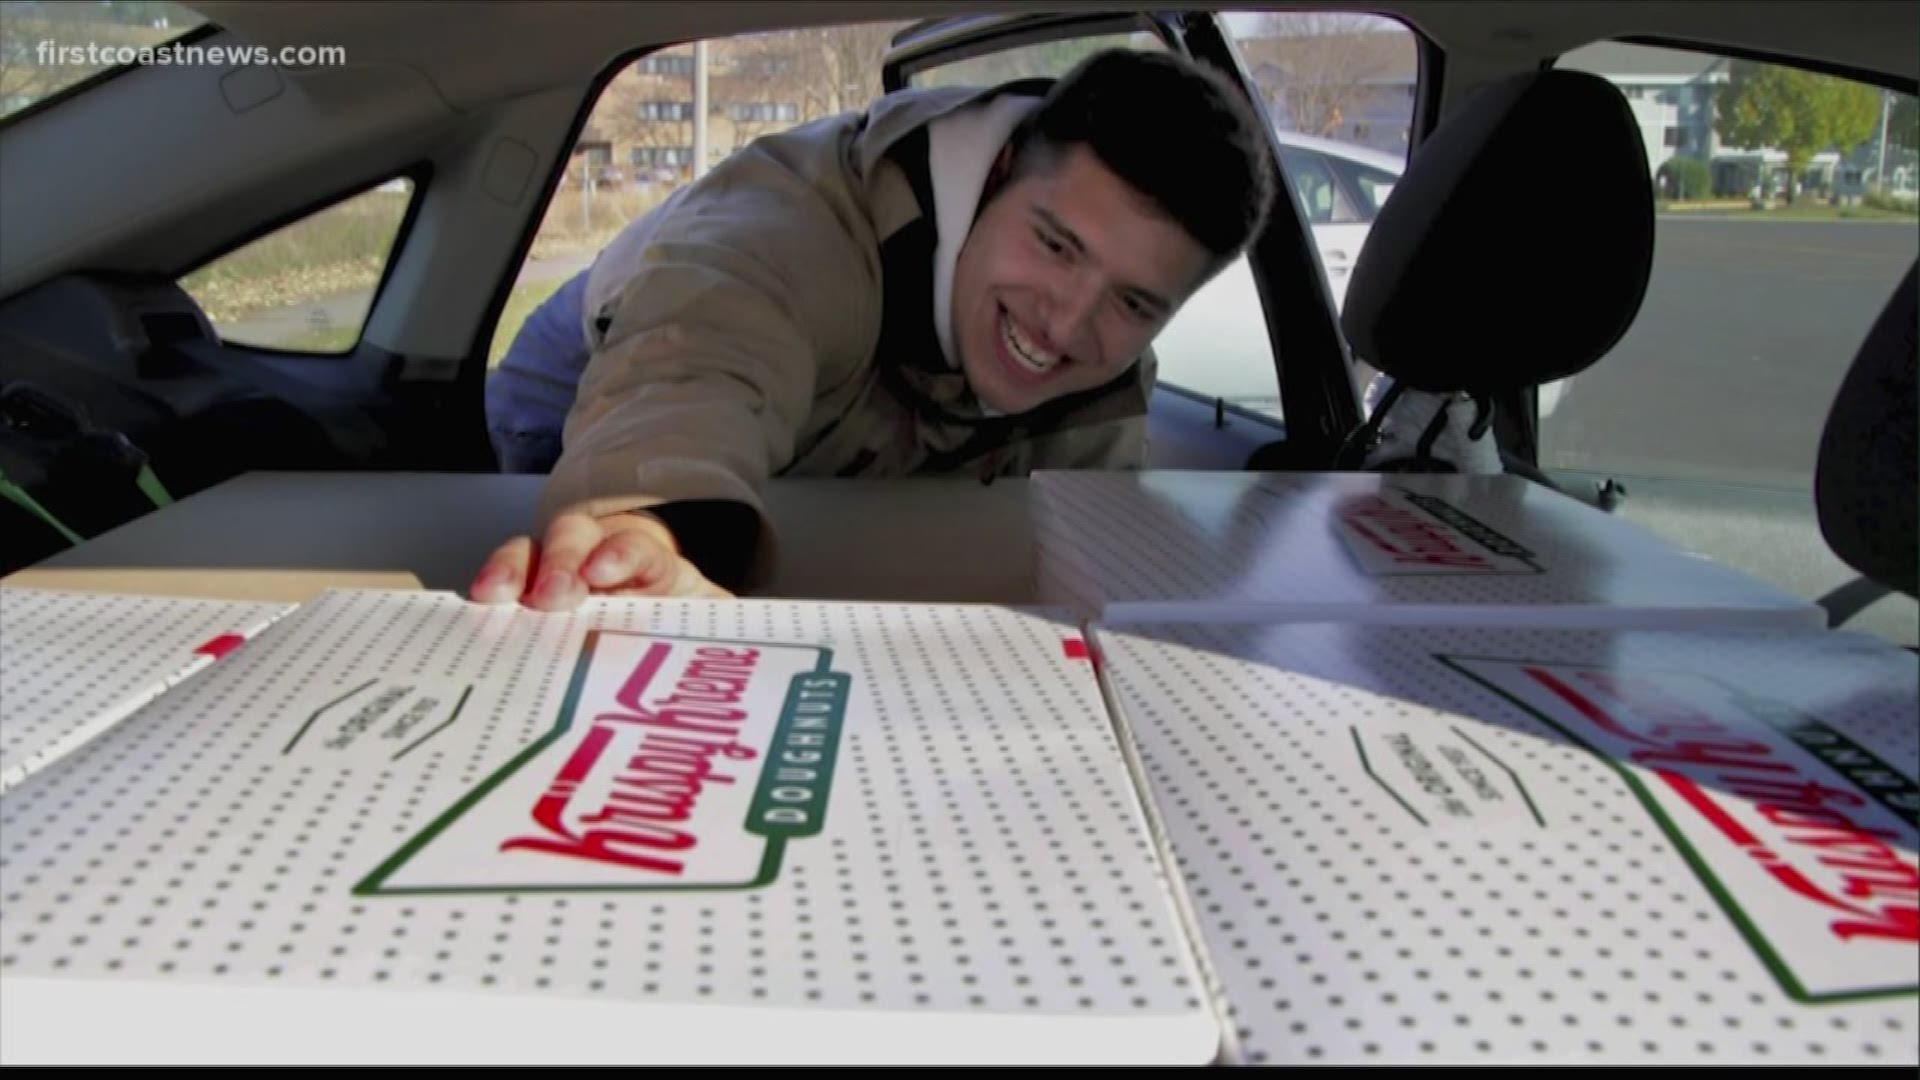 This teen drove hours and hours to buy Krispy Kreme donuts to sell them in his home state. Do you think what he did was smart or schemey?